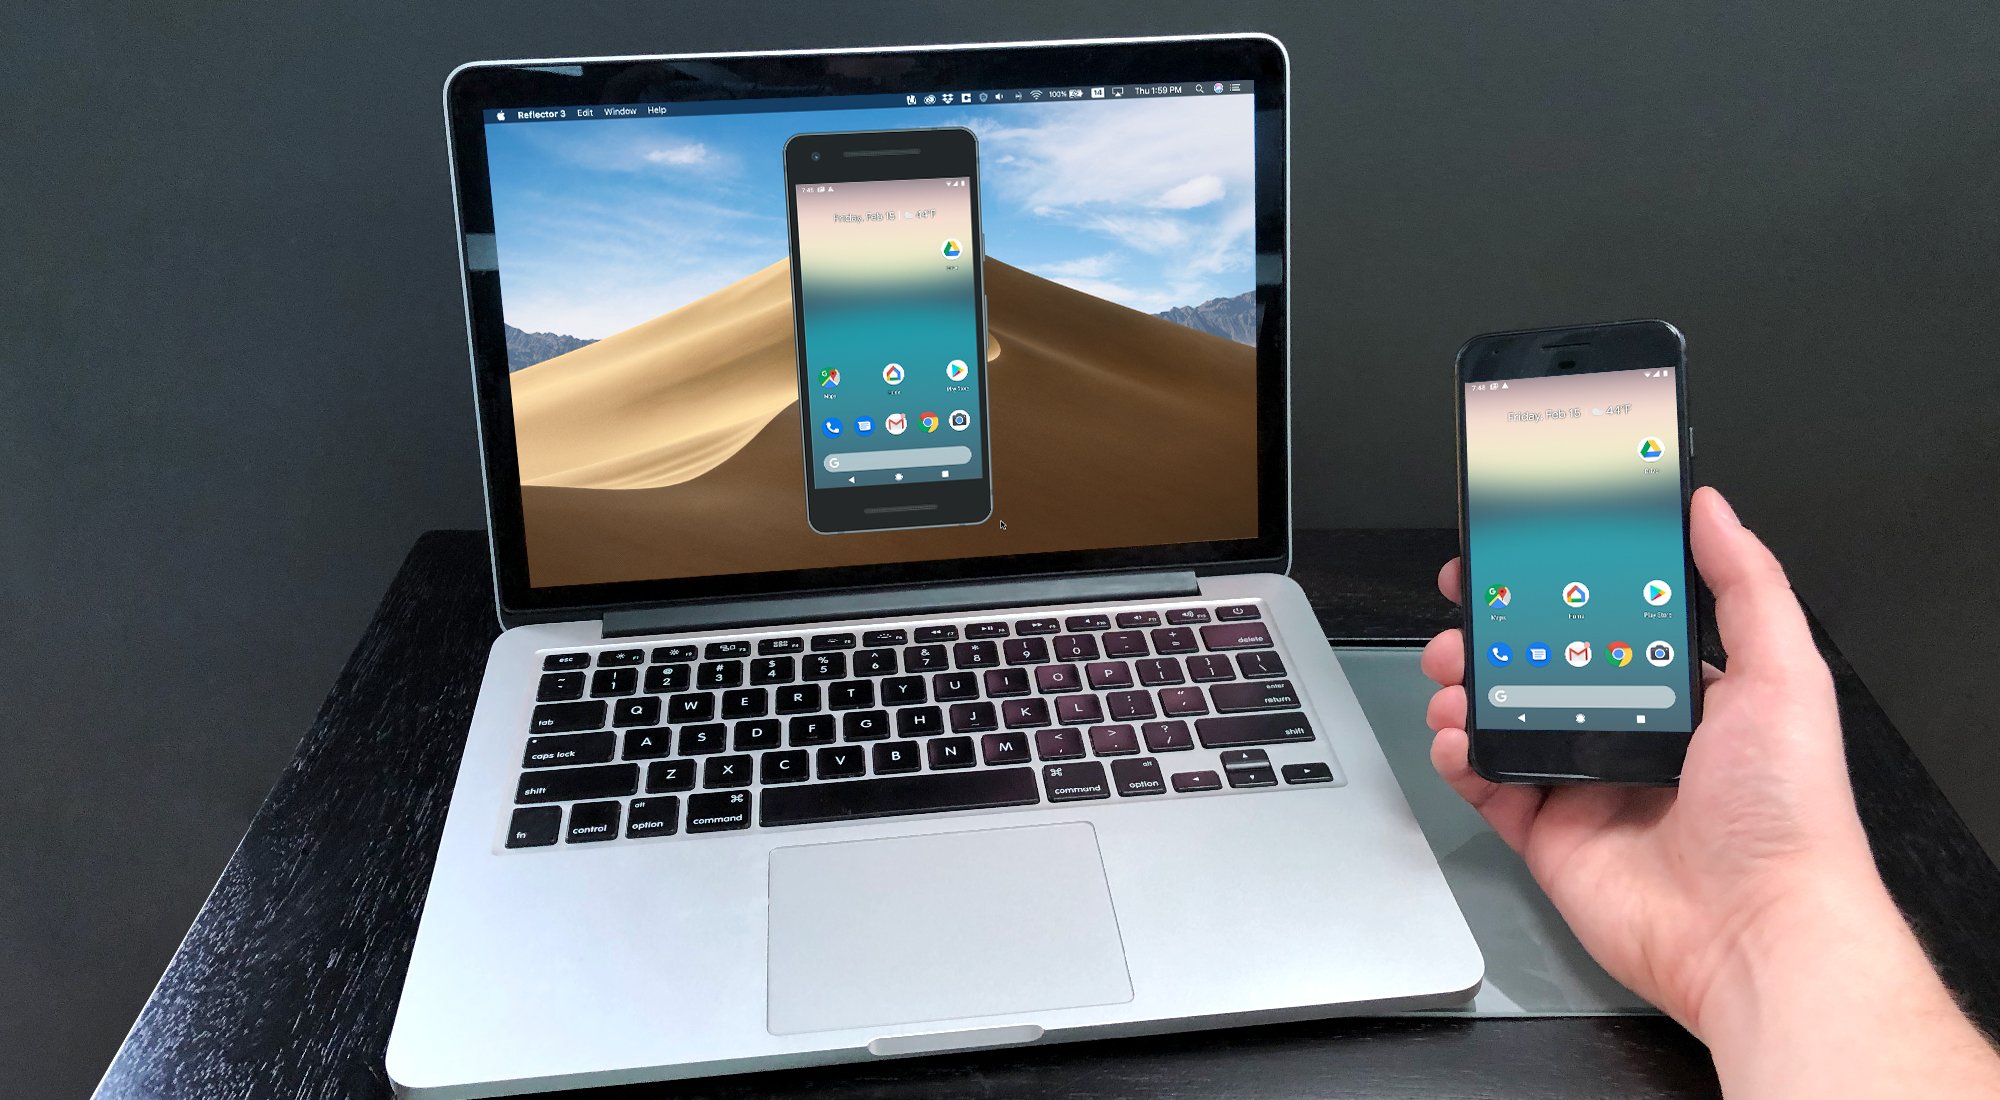 android screen mirroring to mac